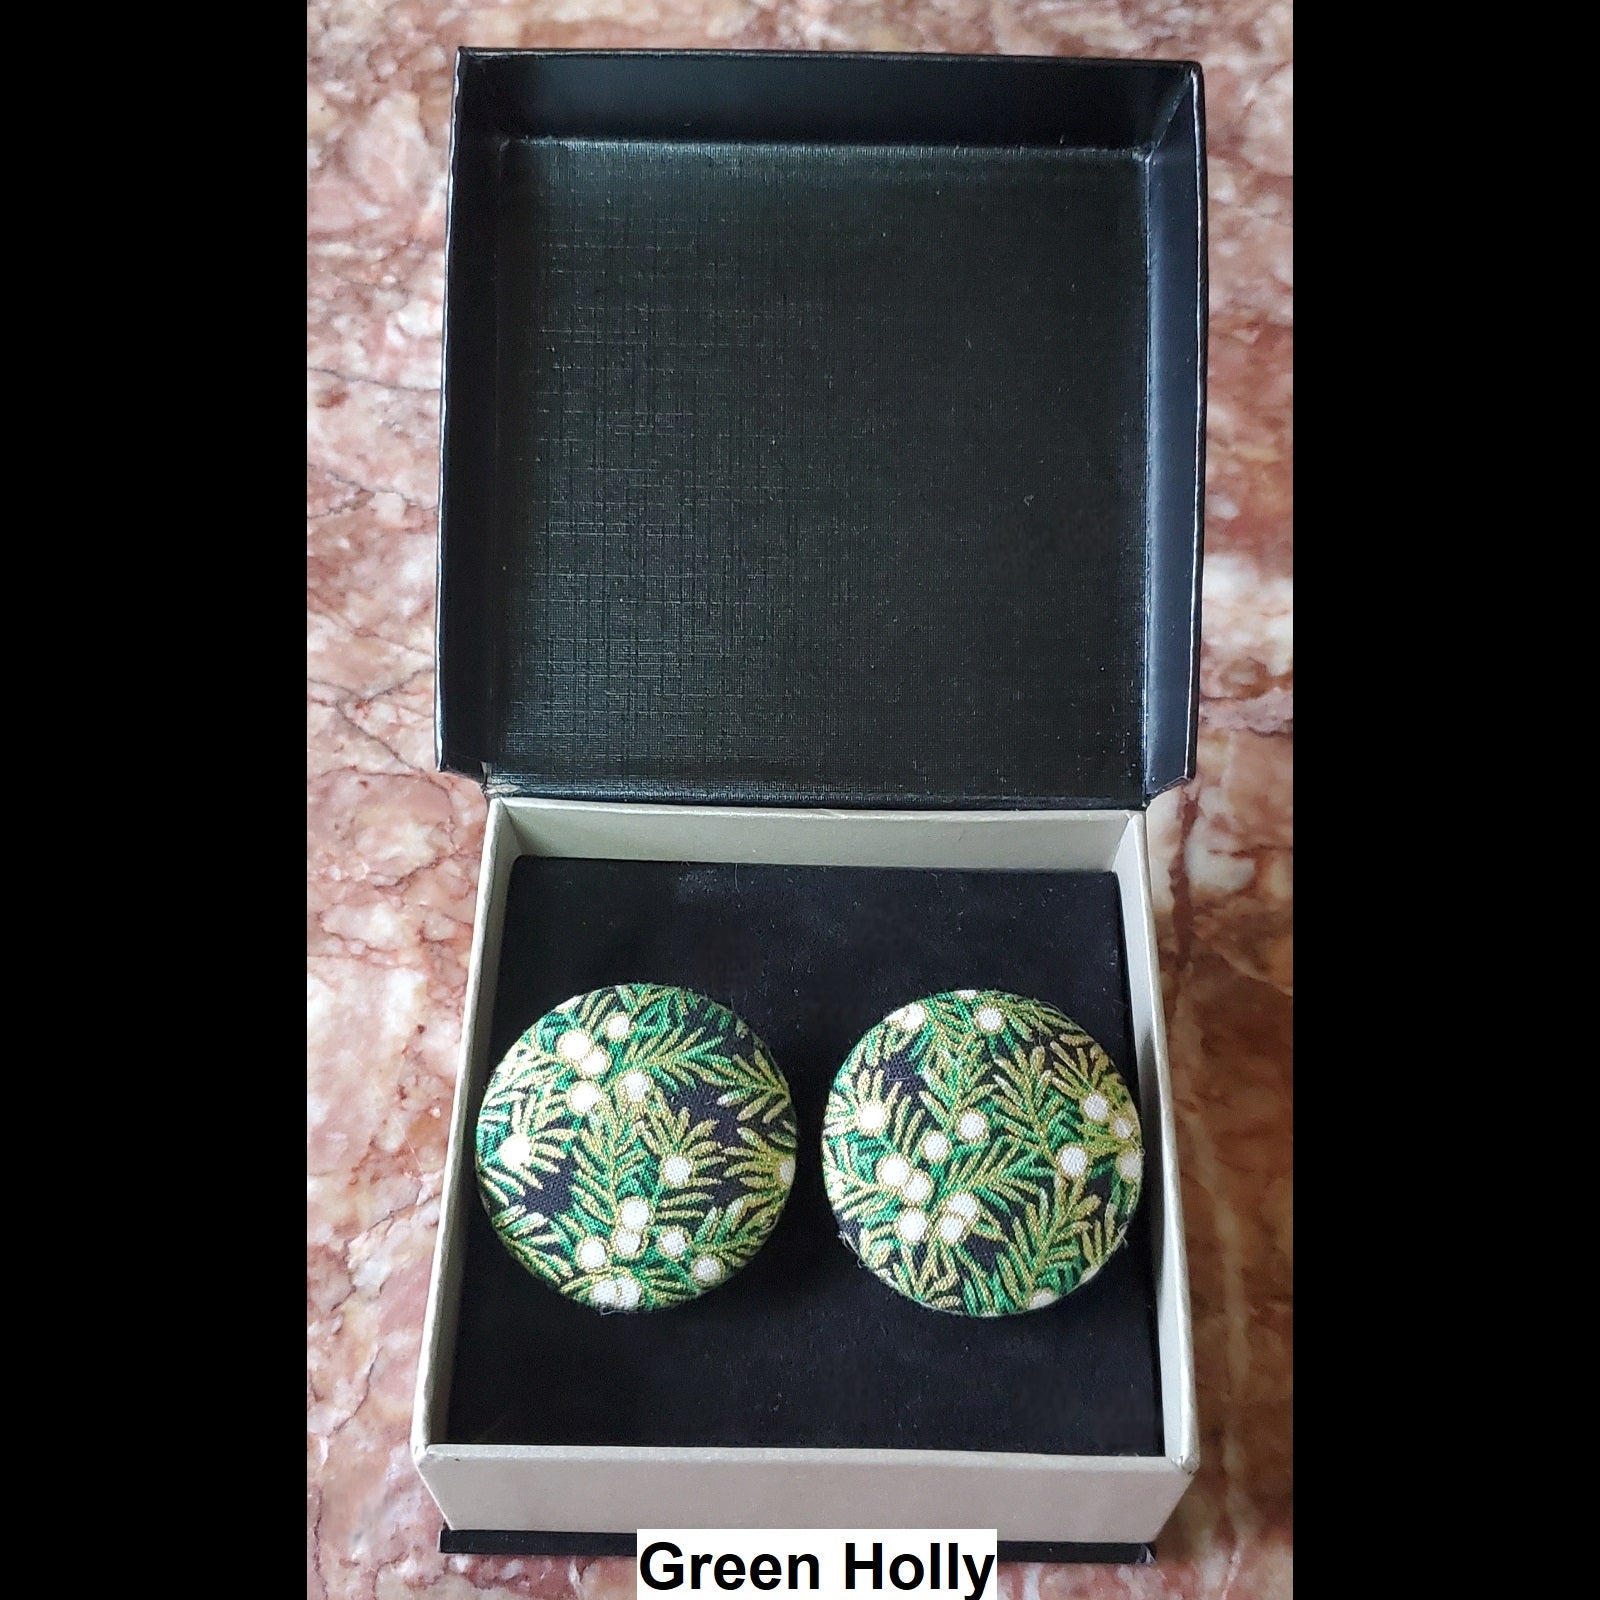 Green Holly Print button earrings in jewelry box